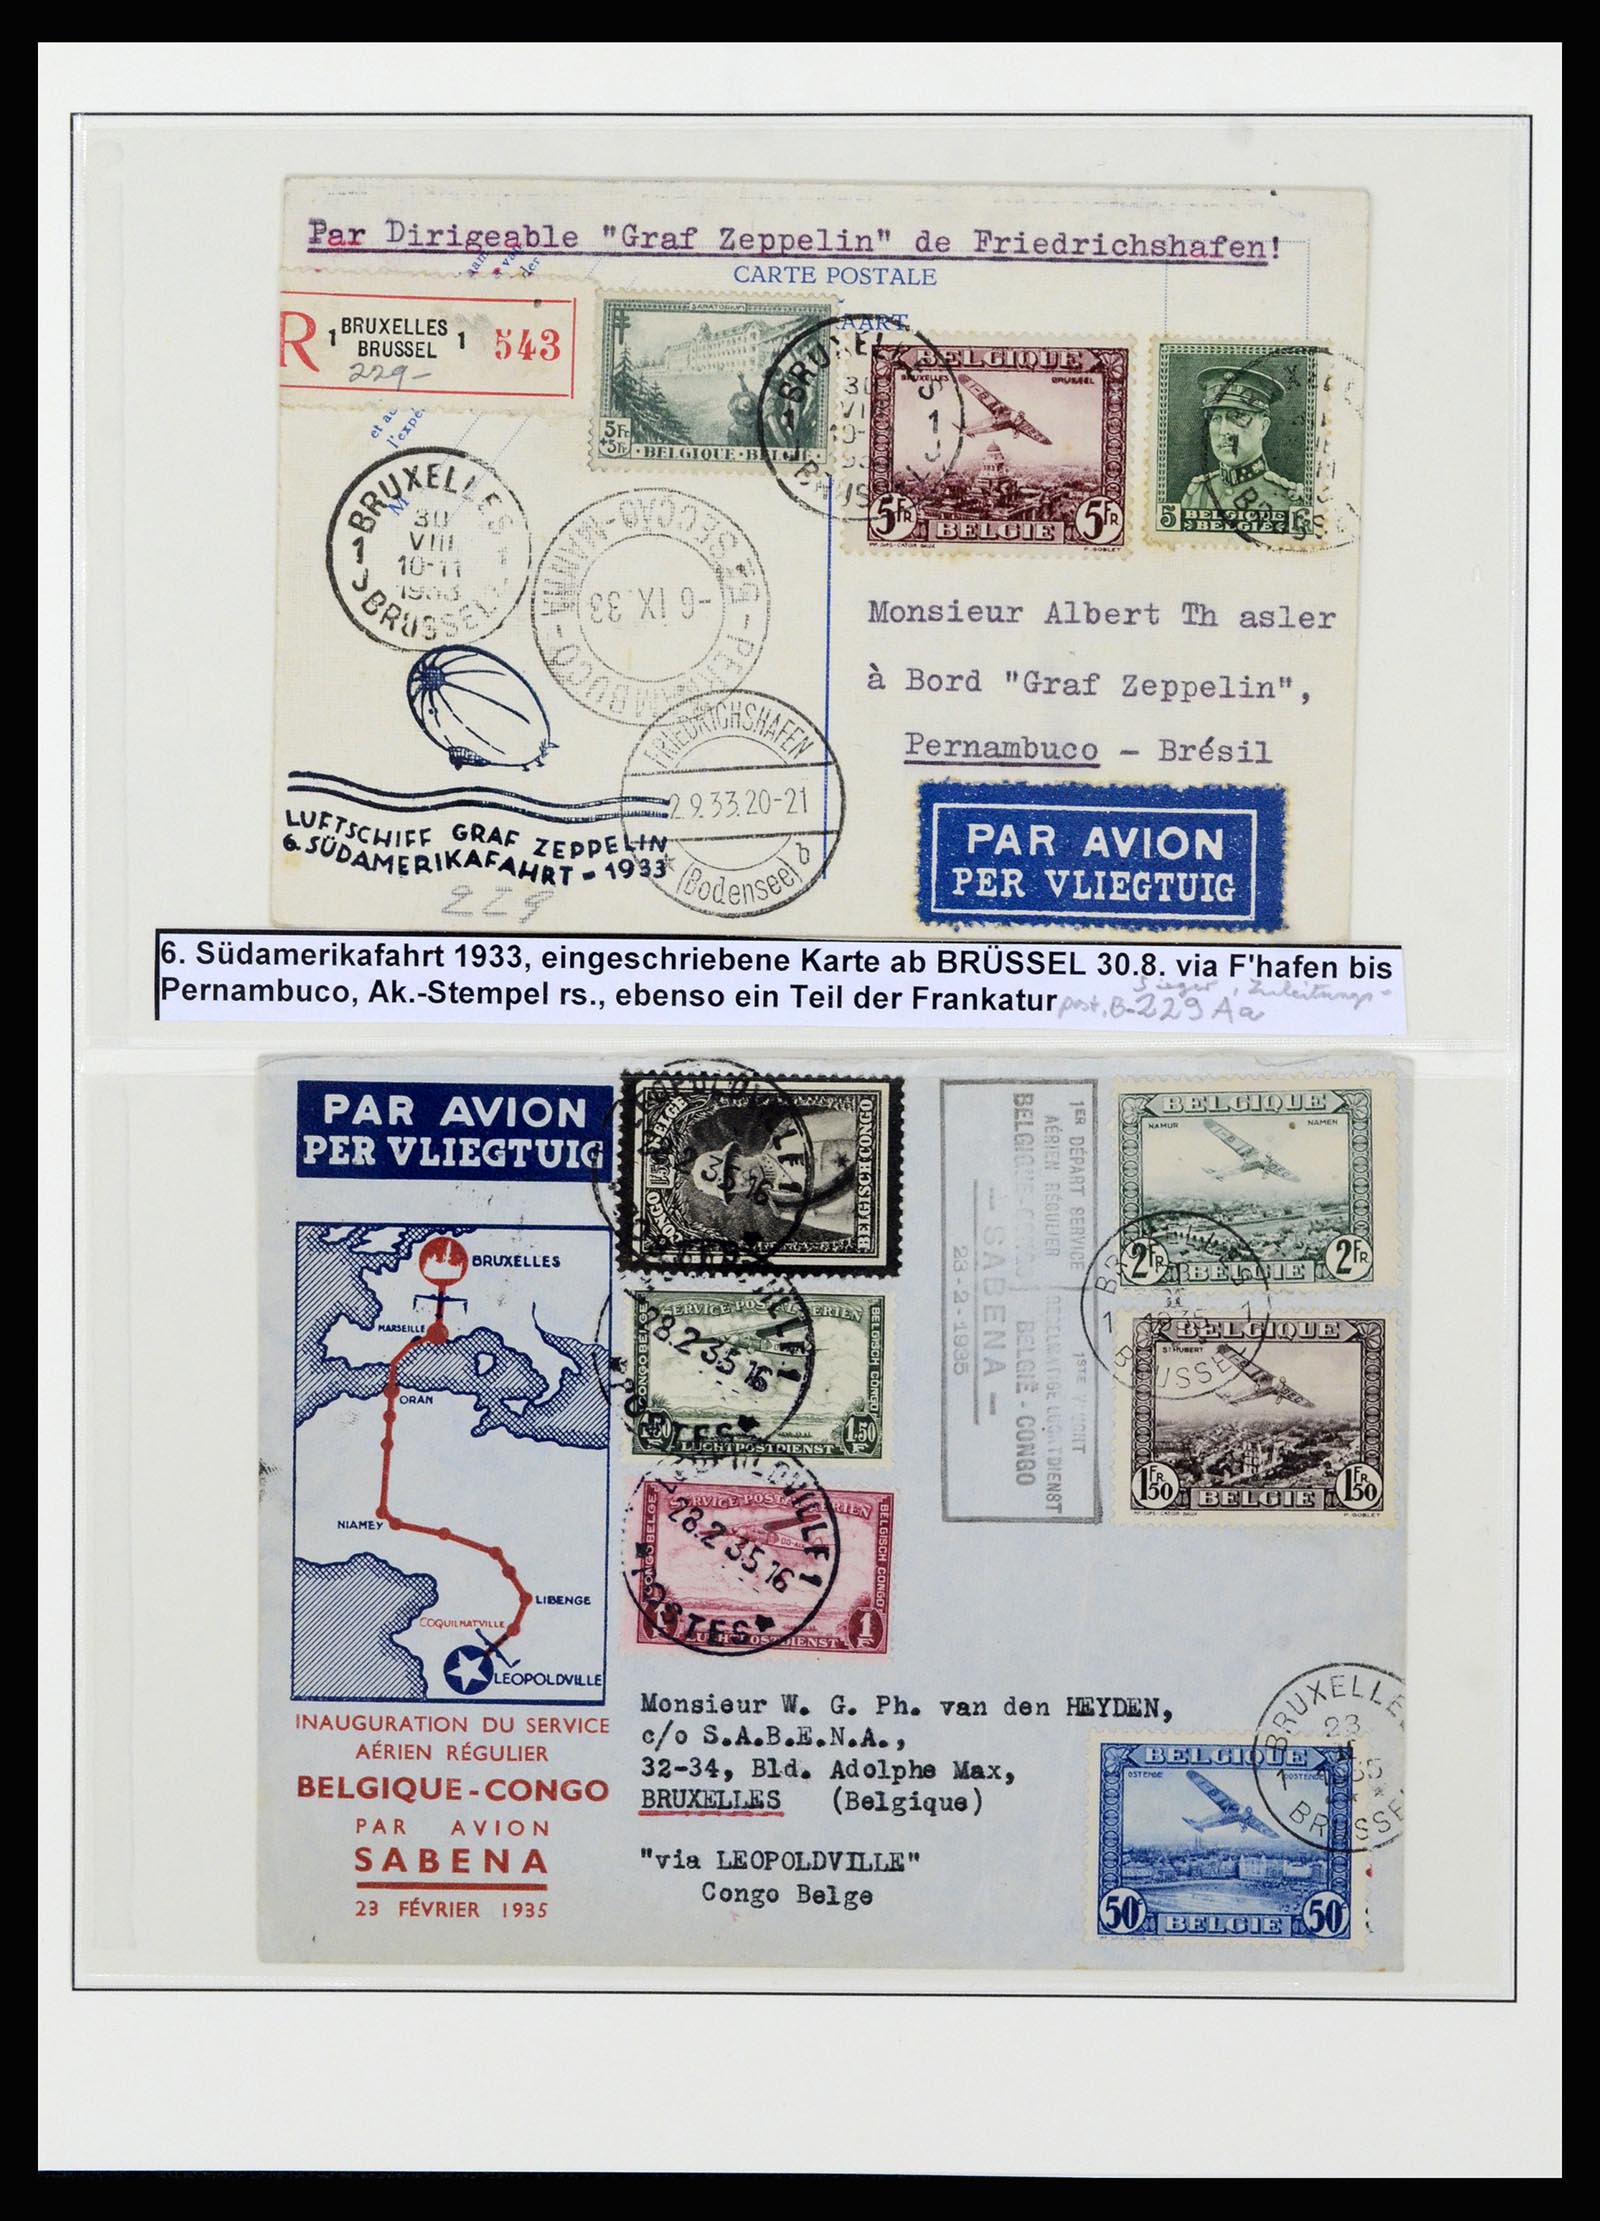 37073 001 - Stamp collection 37073 Belgium covers 1933-1954.